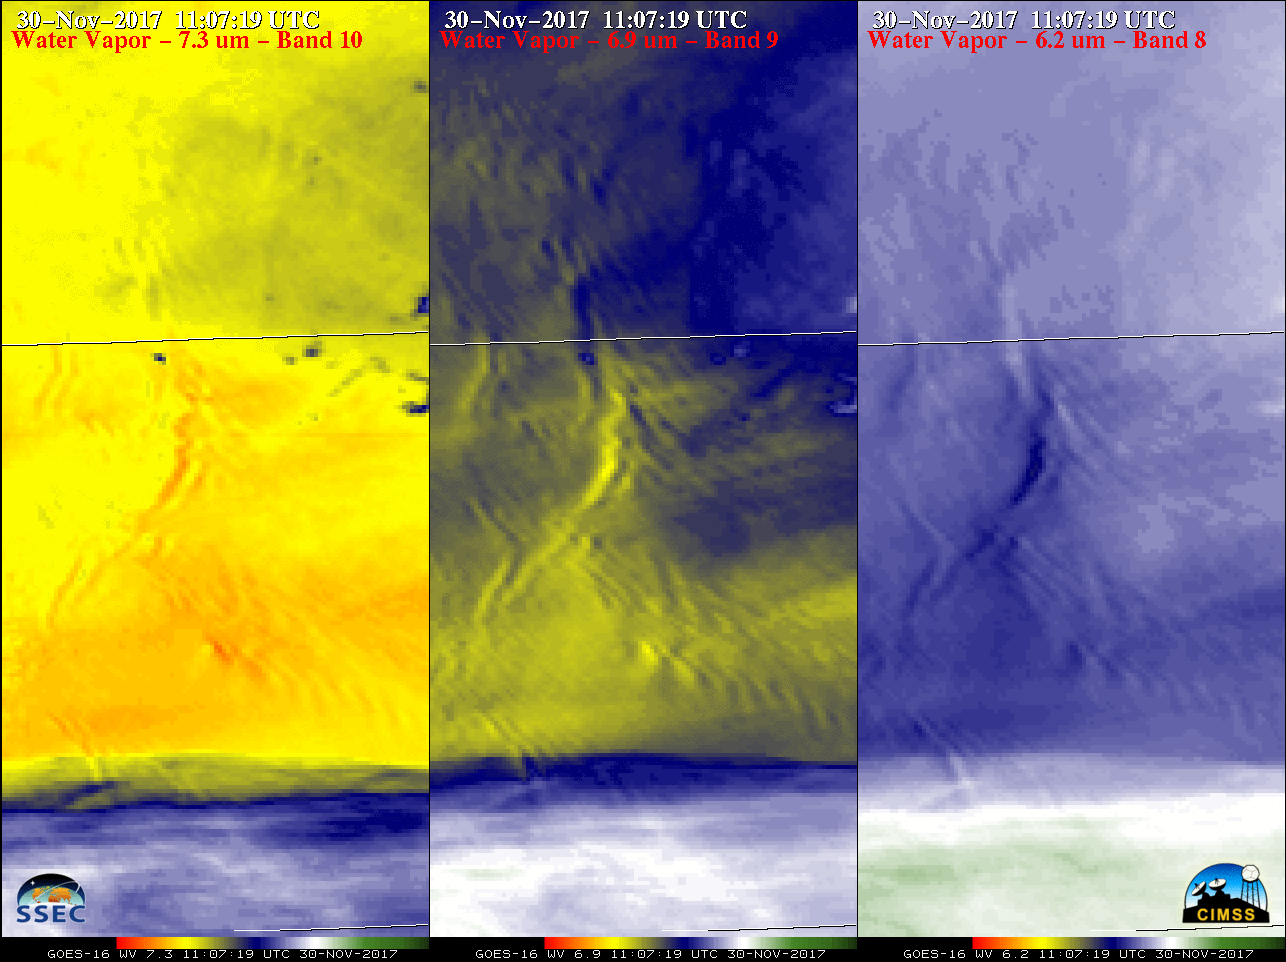 GOES-16 Lower-level (7.3 µm), Mid-level (6.9 µm) and Upper-level (6.2 µm) Water Vapor images [click to play animation]